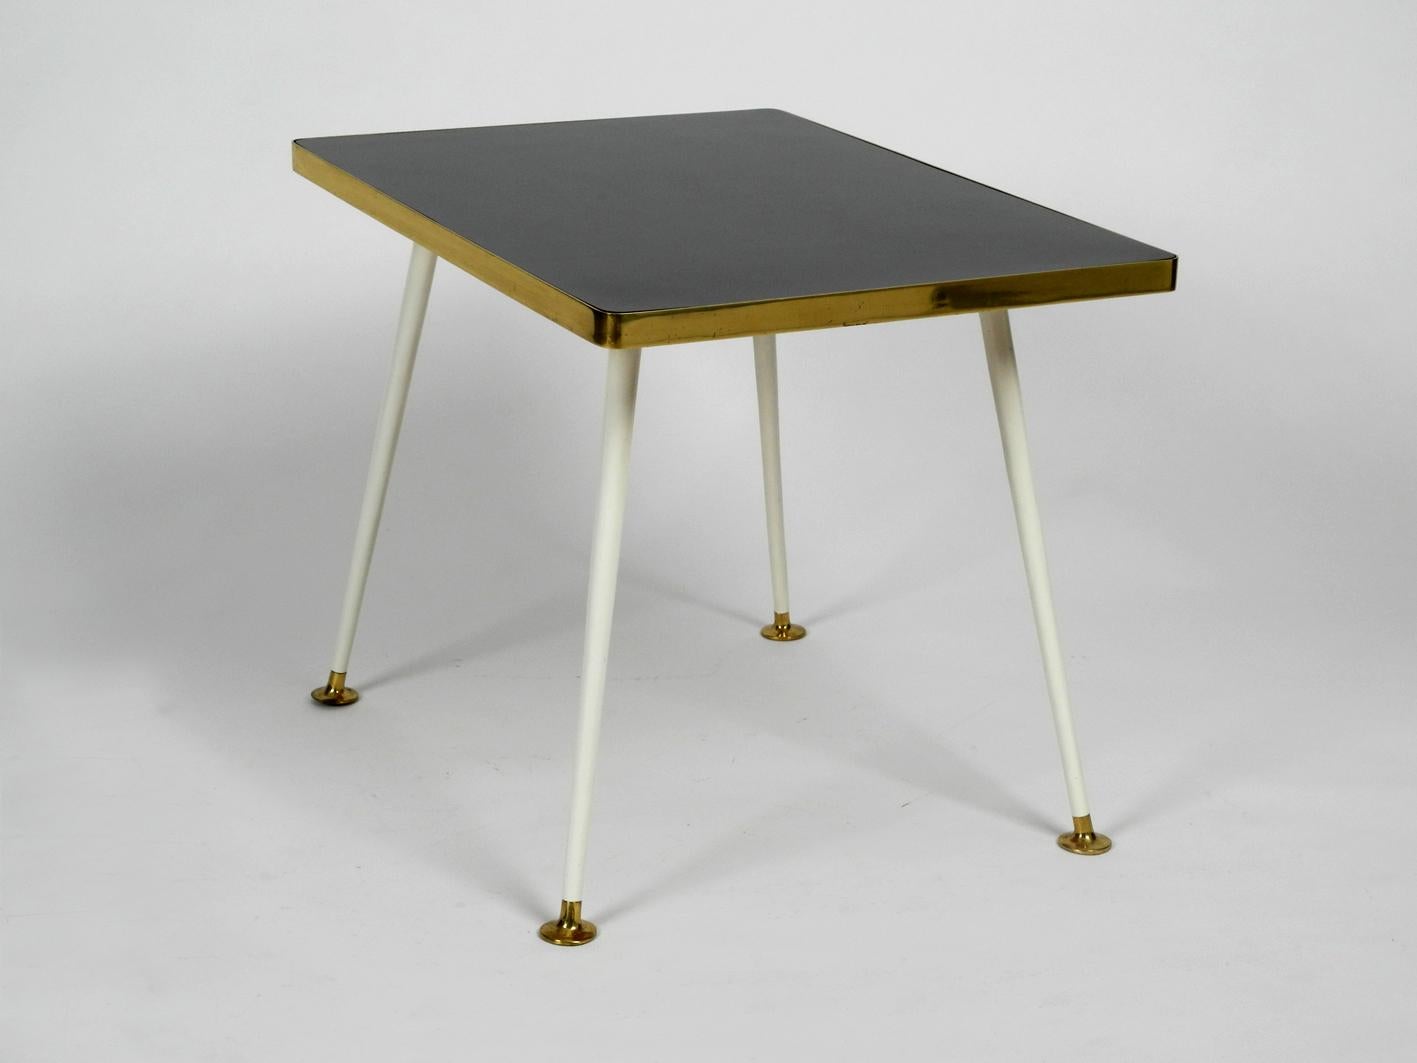 Very rare and pretty Mid Century Modernist side table. Great minimalistic rare design from the Vereinigte Werkstätten.
Solid wood top with resopal surface. Edges are made of solid brass. Metal legs are white lacquered. Feet are made of brass.
Very